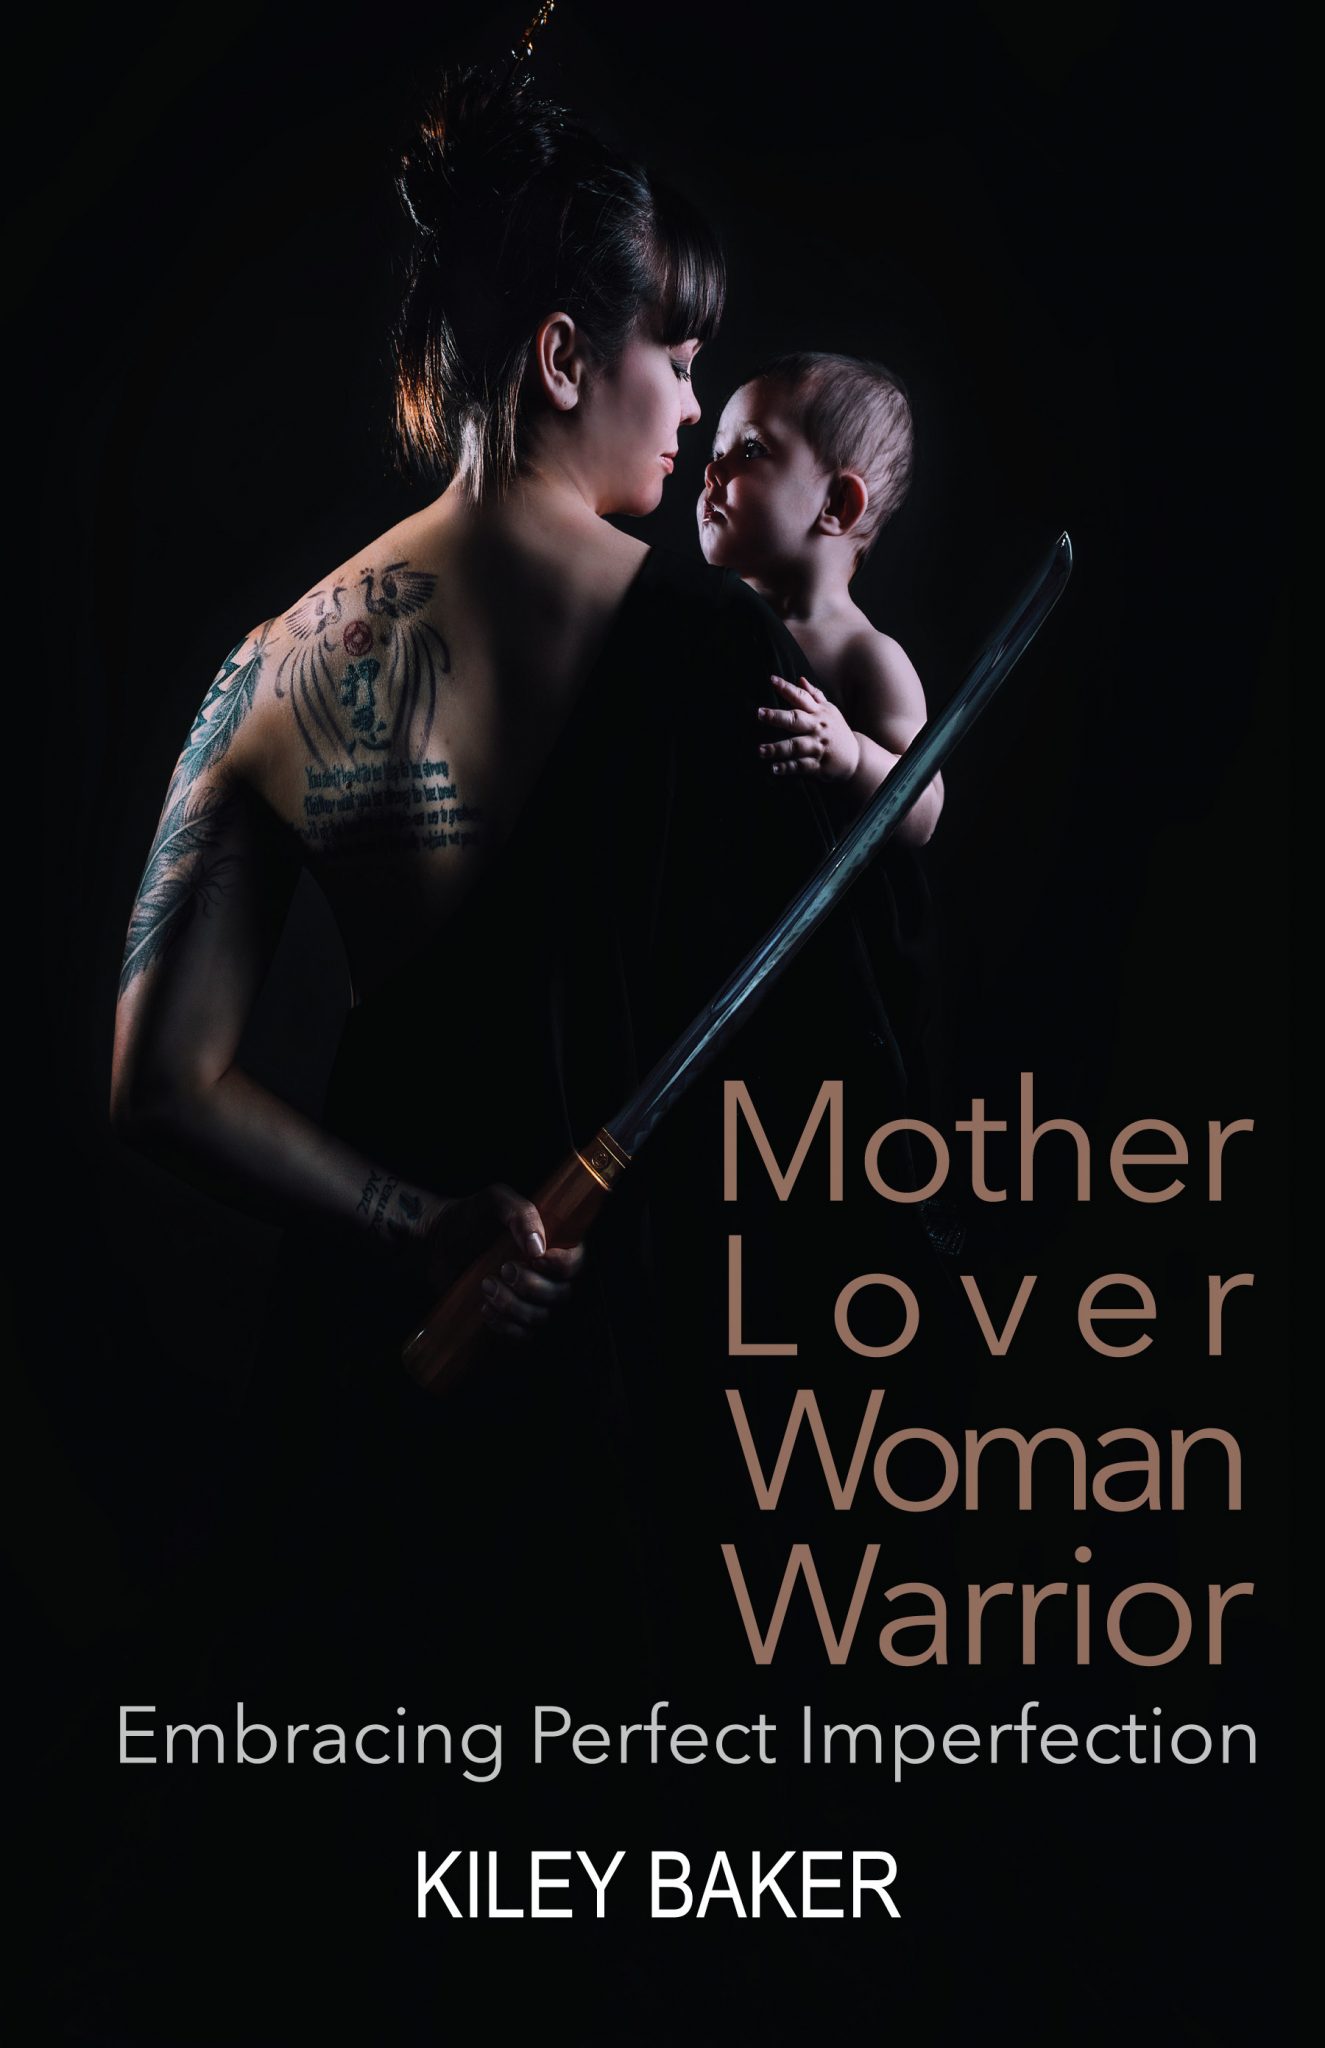 Mother Lover Woman Warrior